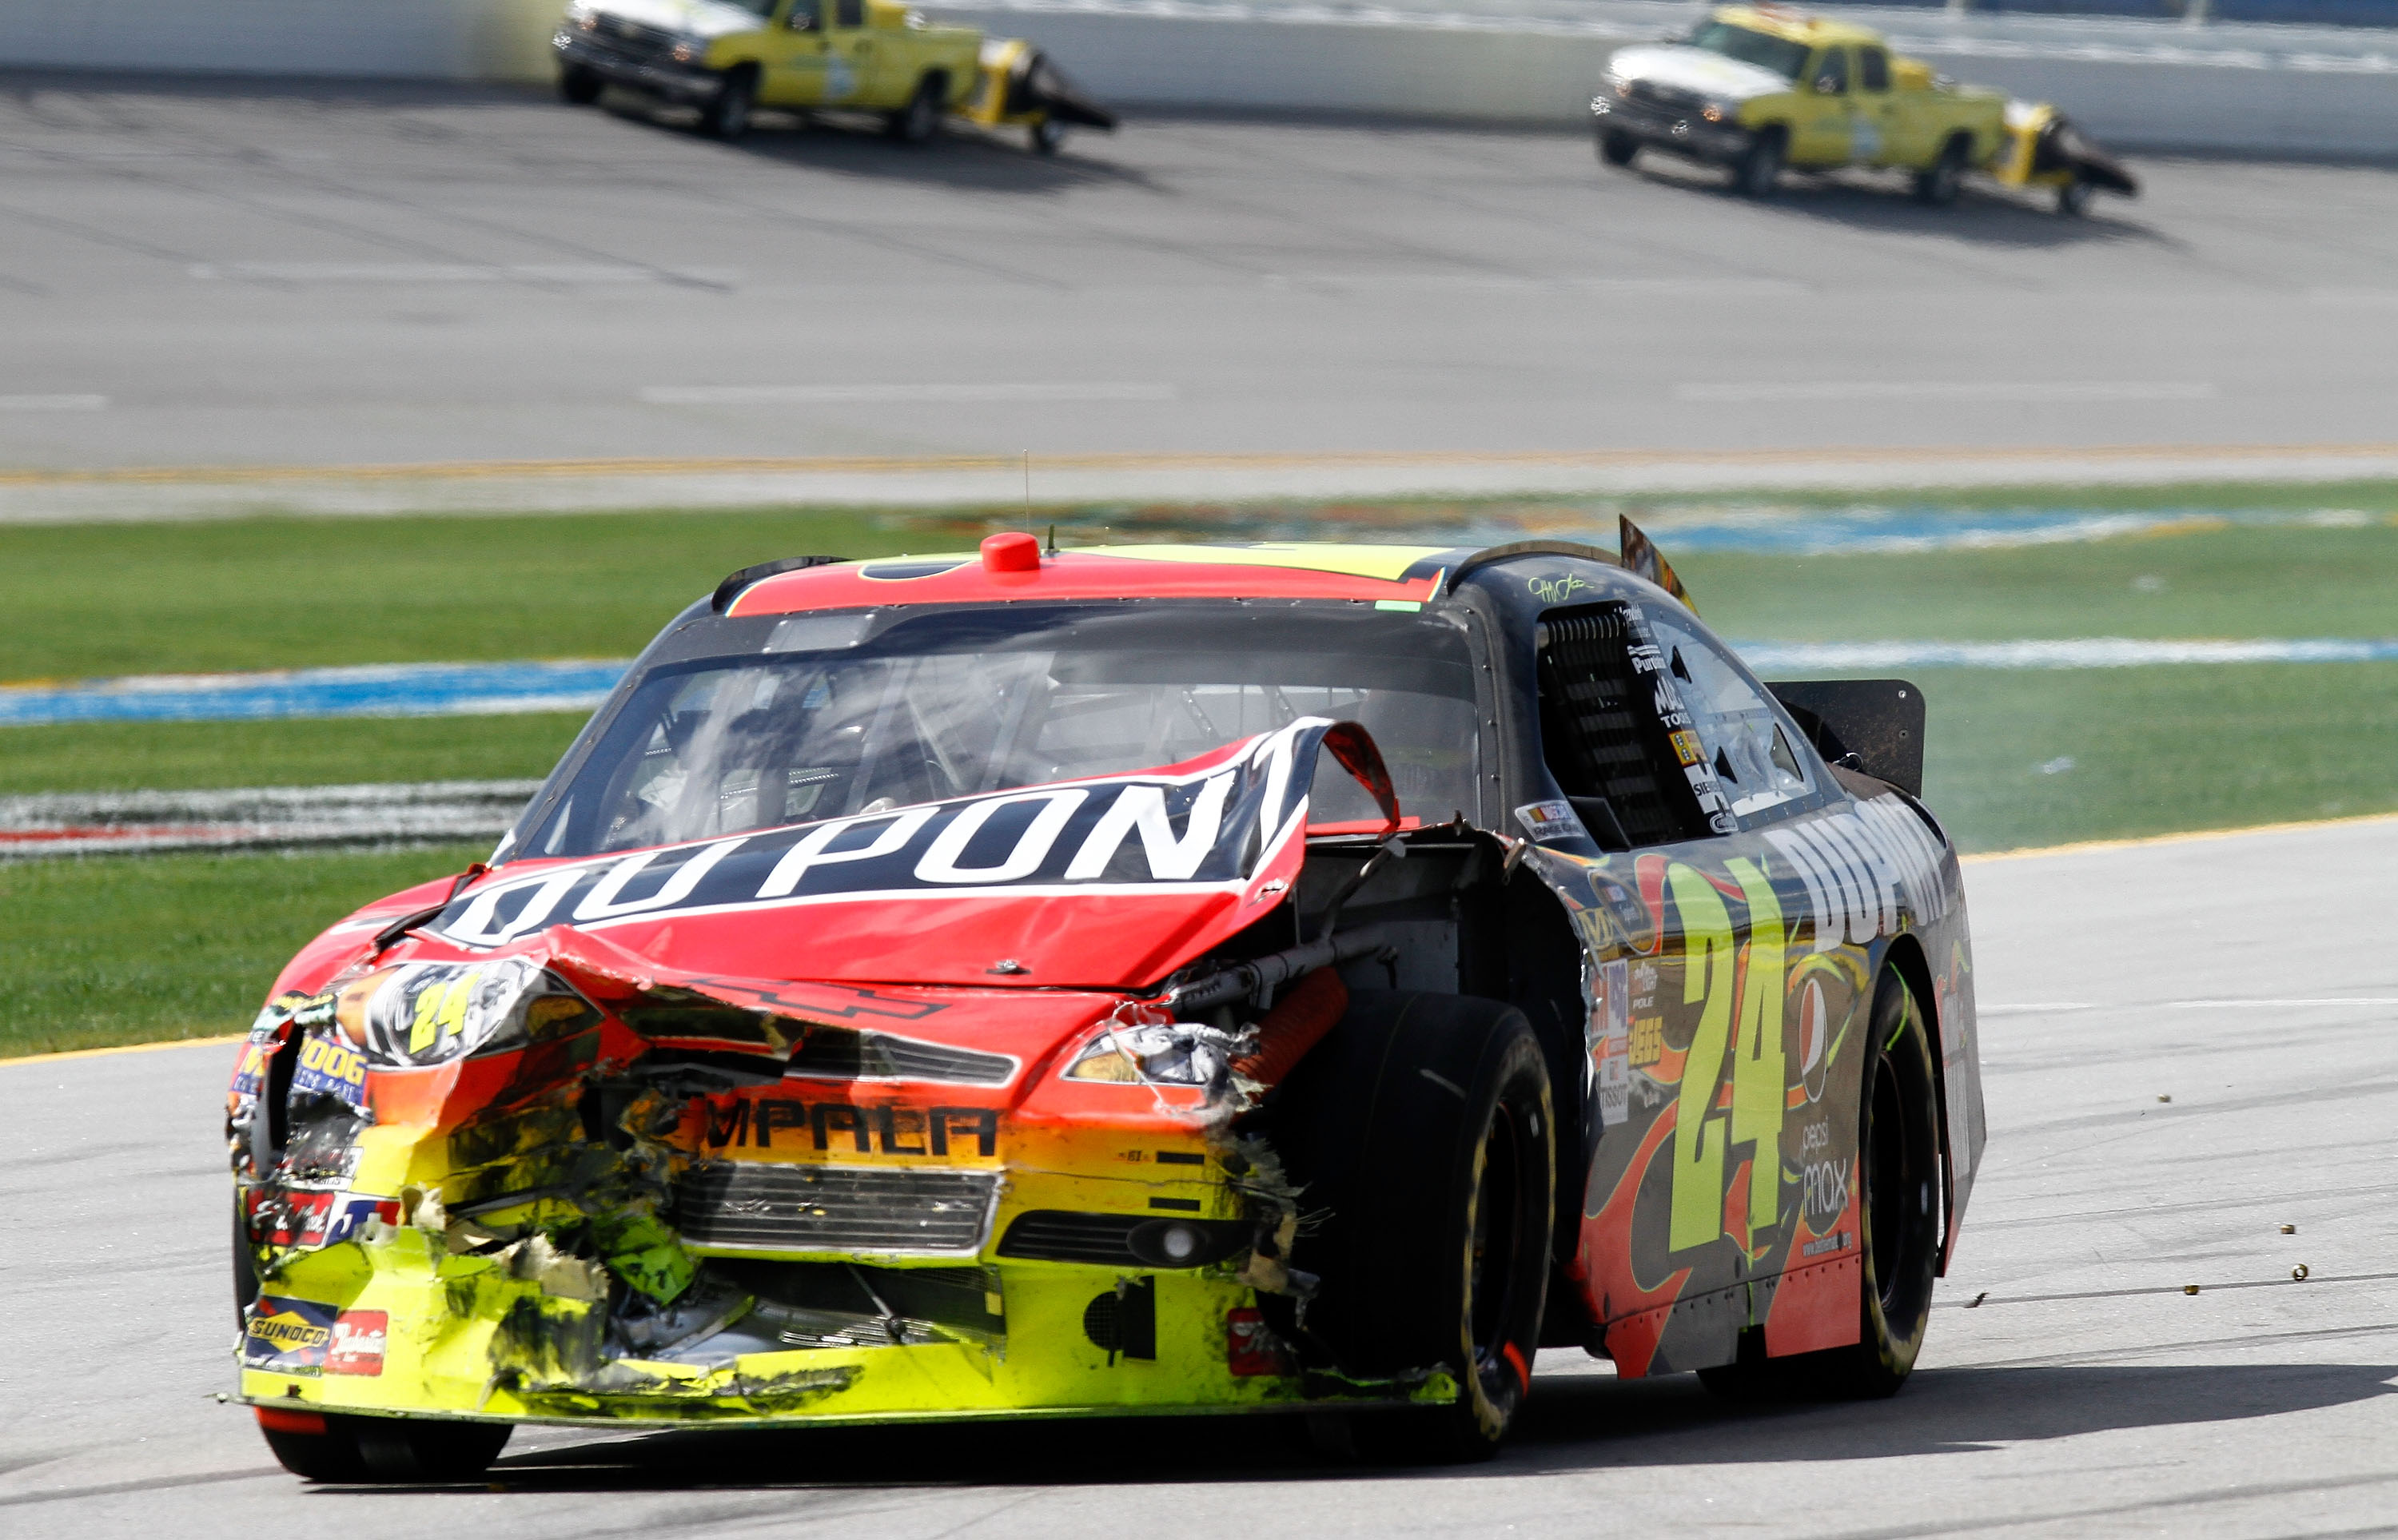 TALLADEGA, AL - APRIL 25: Jeff Gordon drives the #24 DuPont Chevrolet on pit road after suffering damage in a multicar incident in the NASCAR Sprint Cup Series Aaron